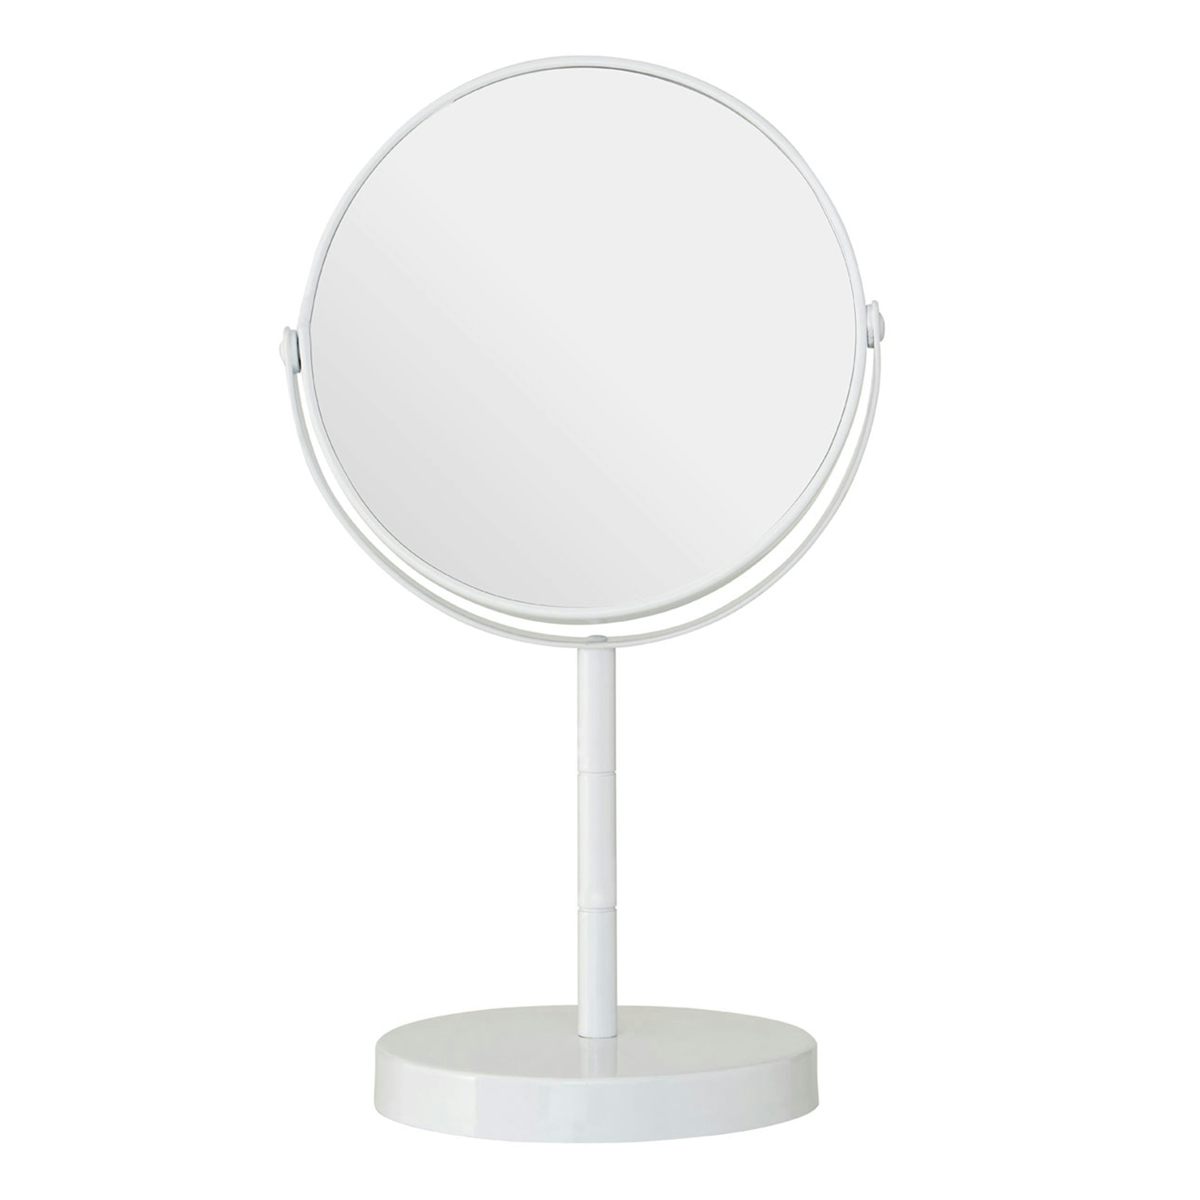 Accents White small freestanding vanity mirror with 2x magnification